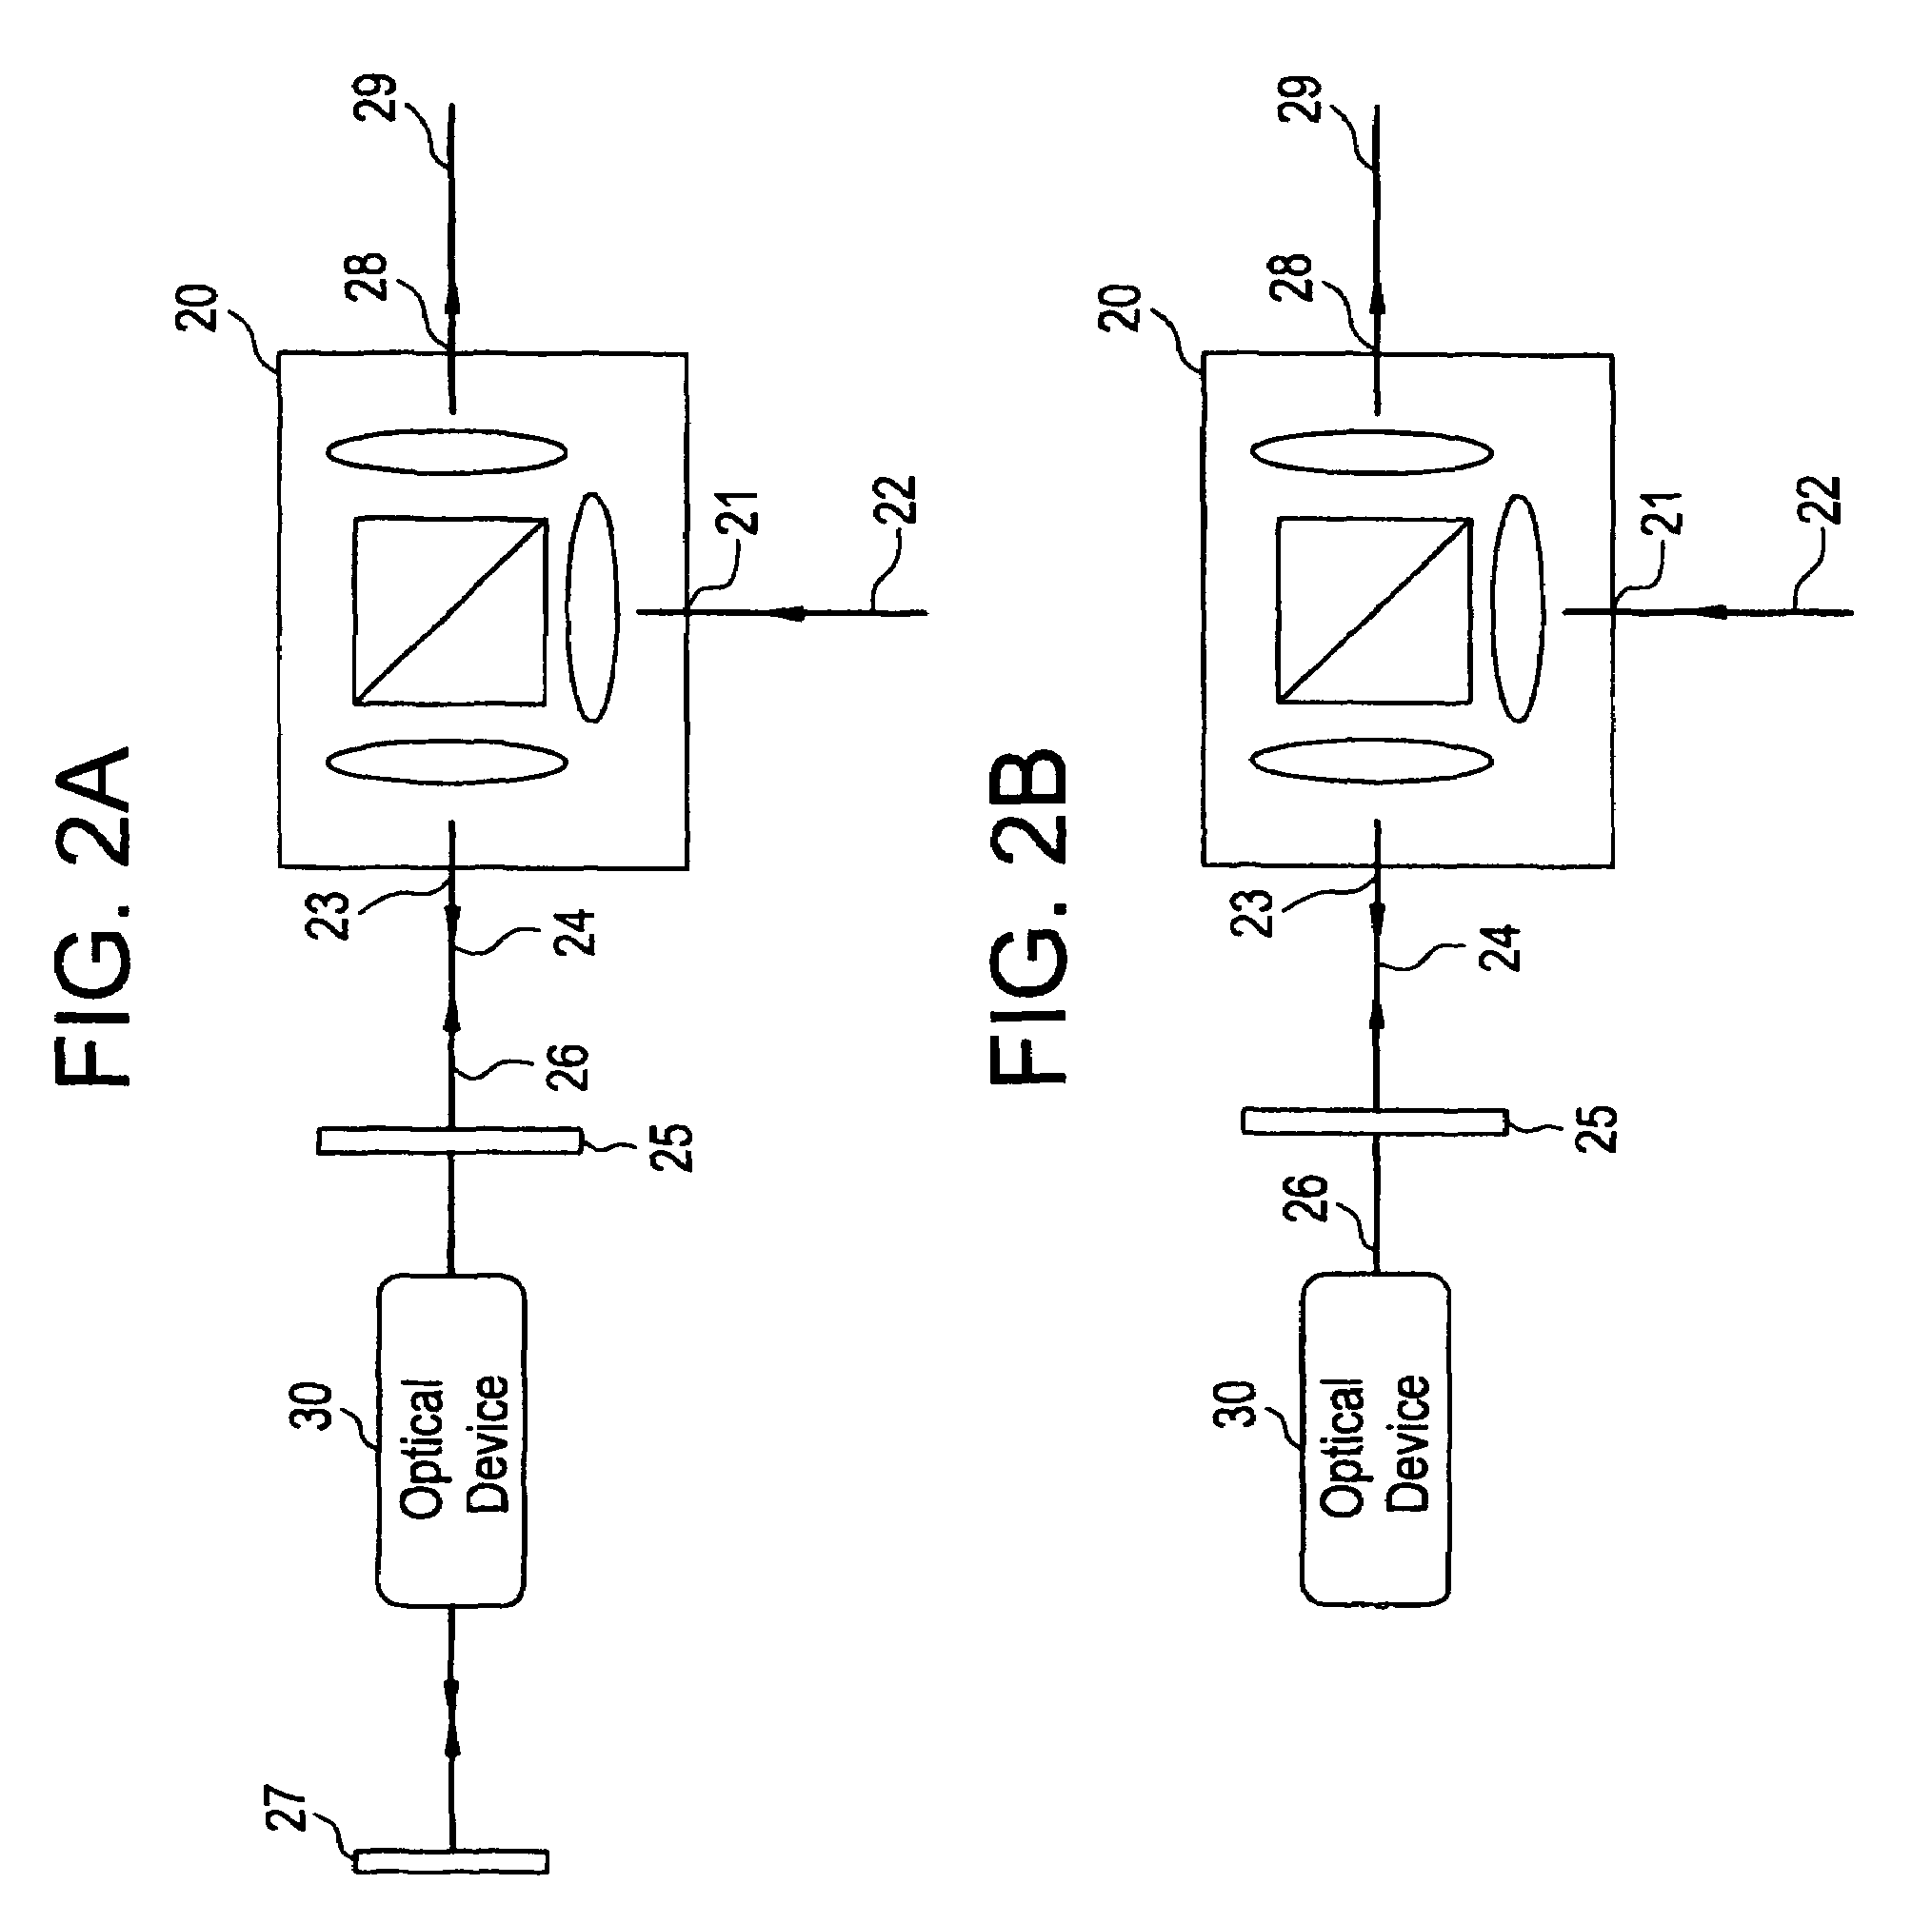 High power fiber chirped pulse amplification system utilizing telecom-type components